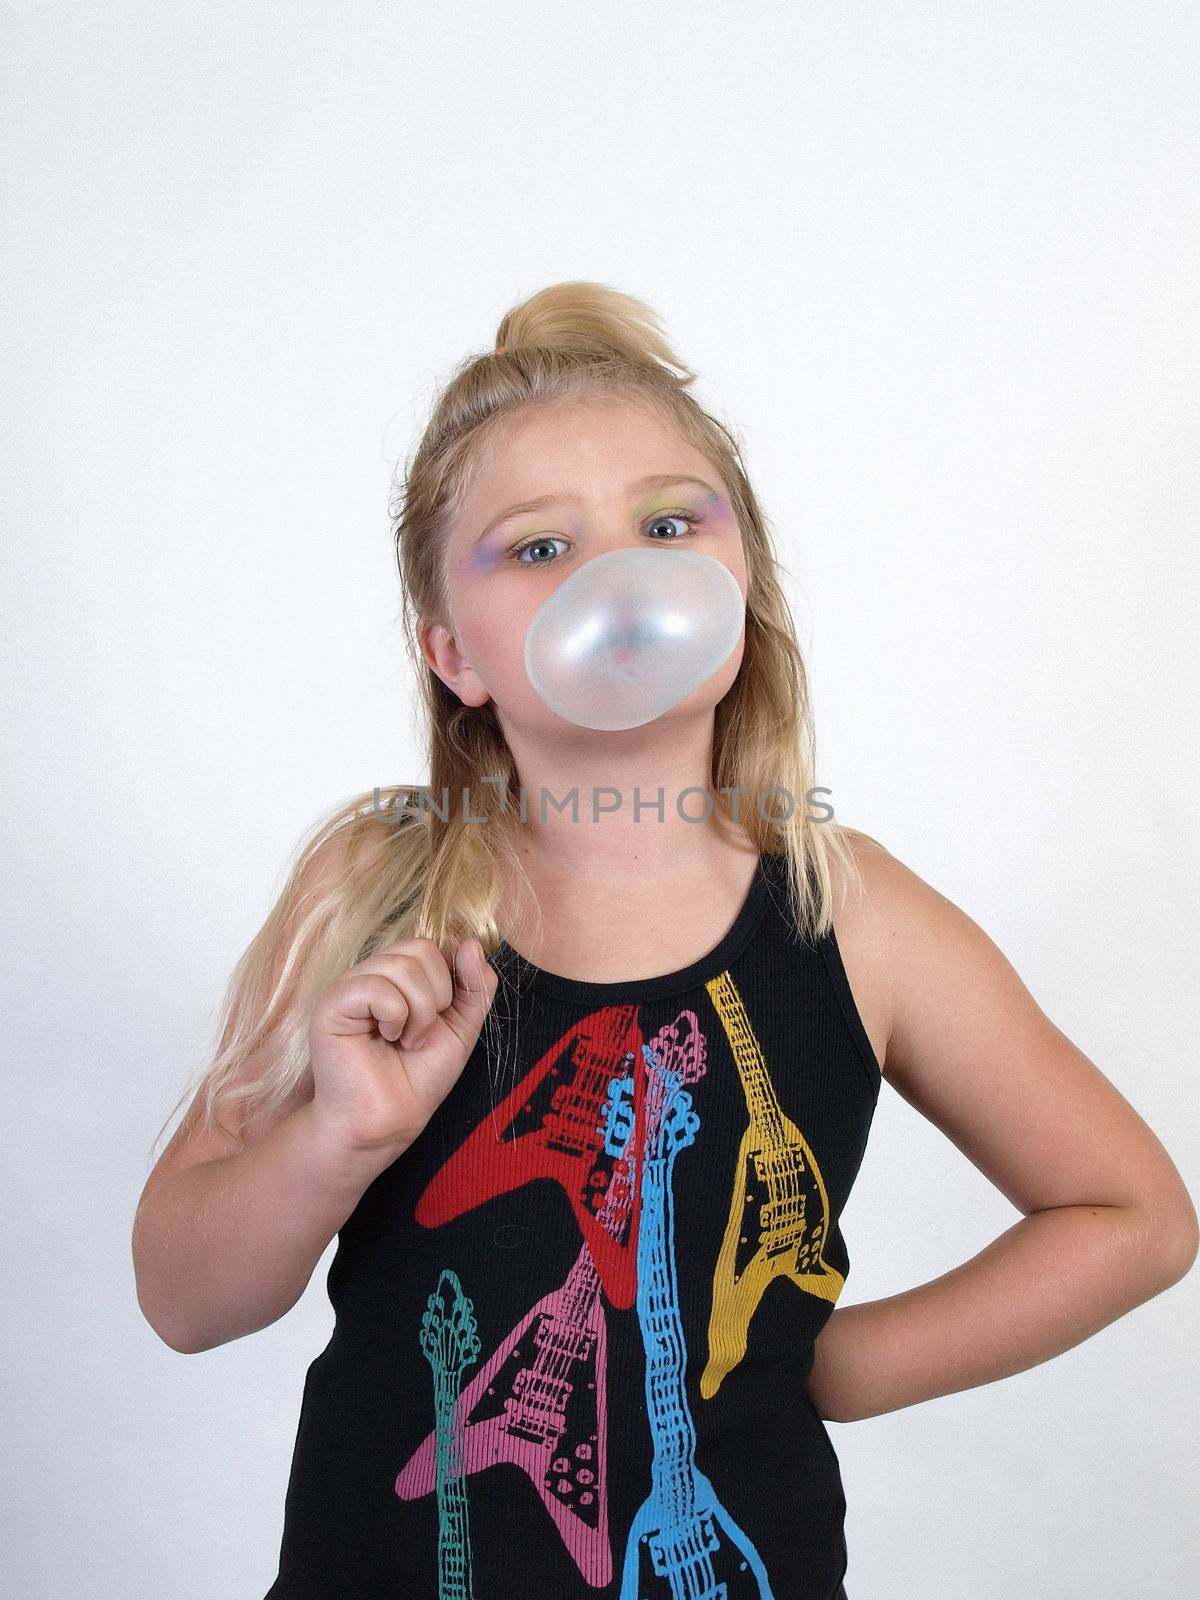 A girl blowing a bubble with her gum. Over white.